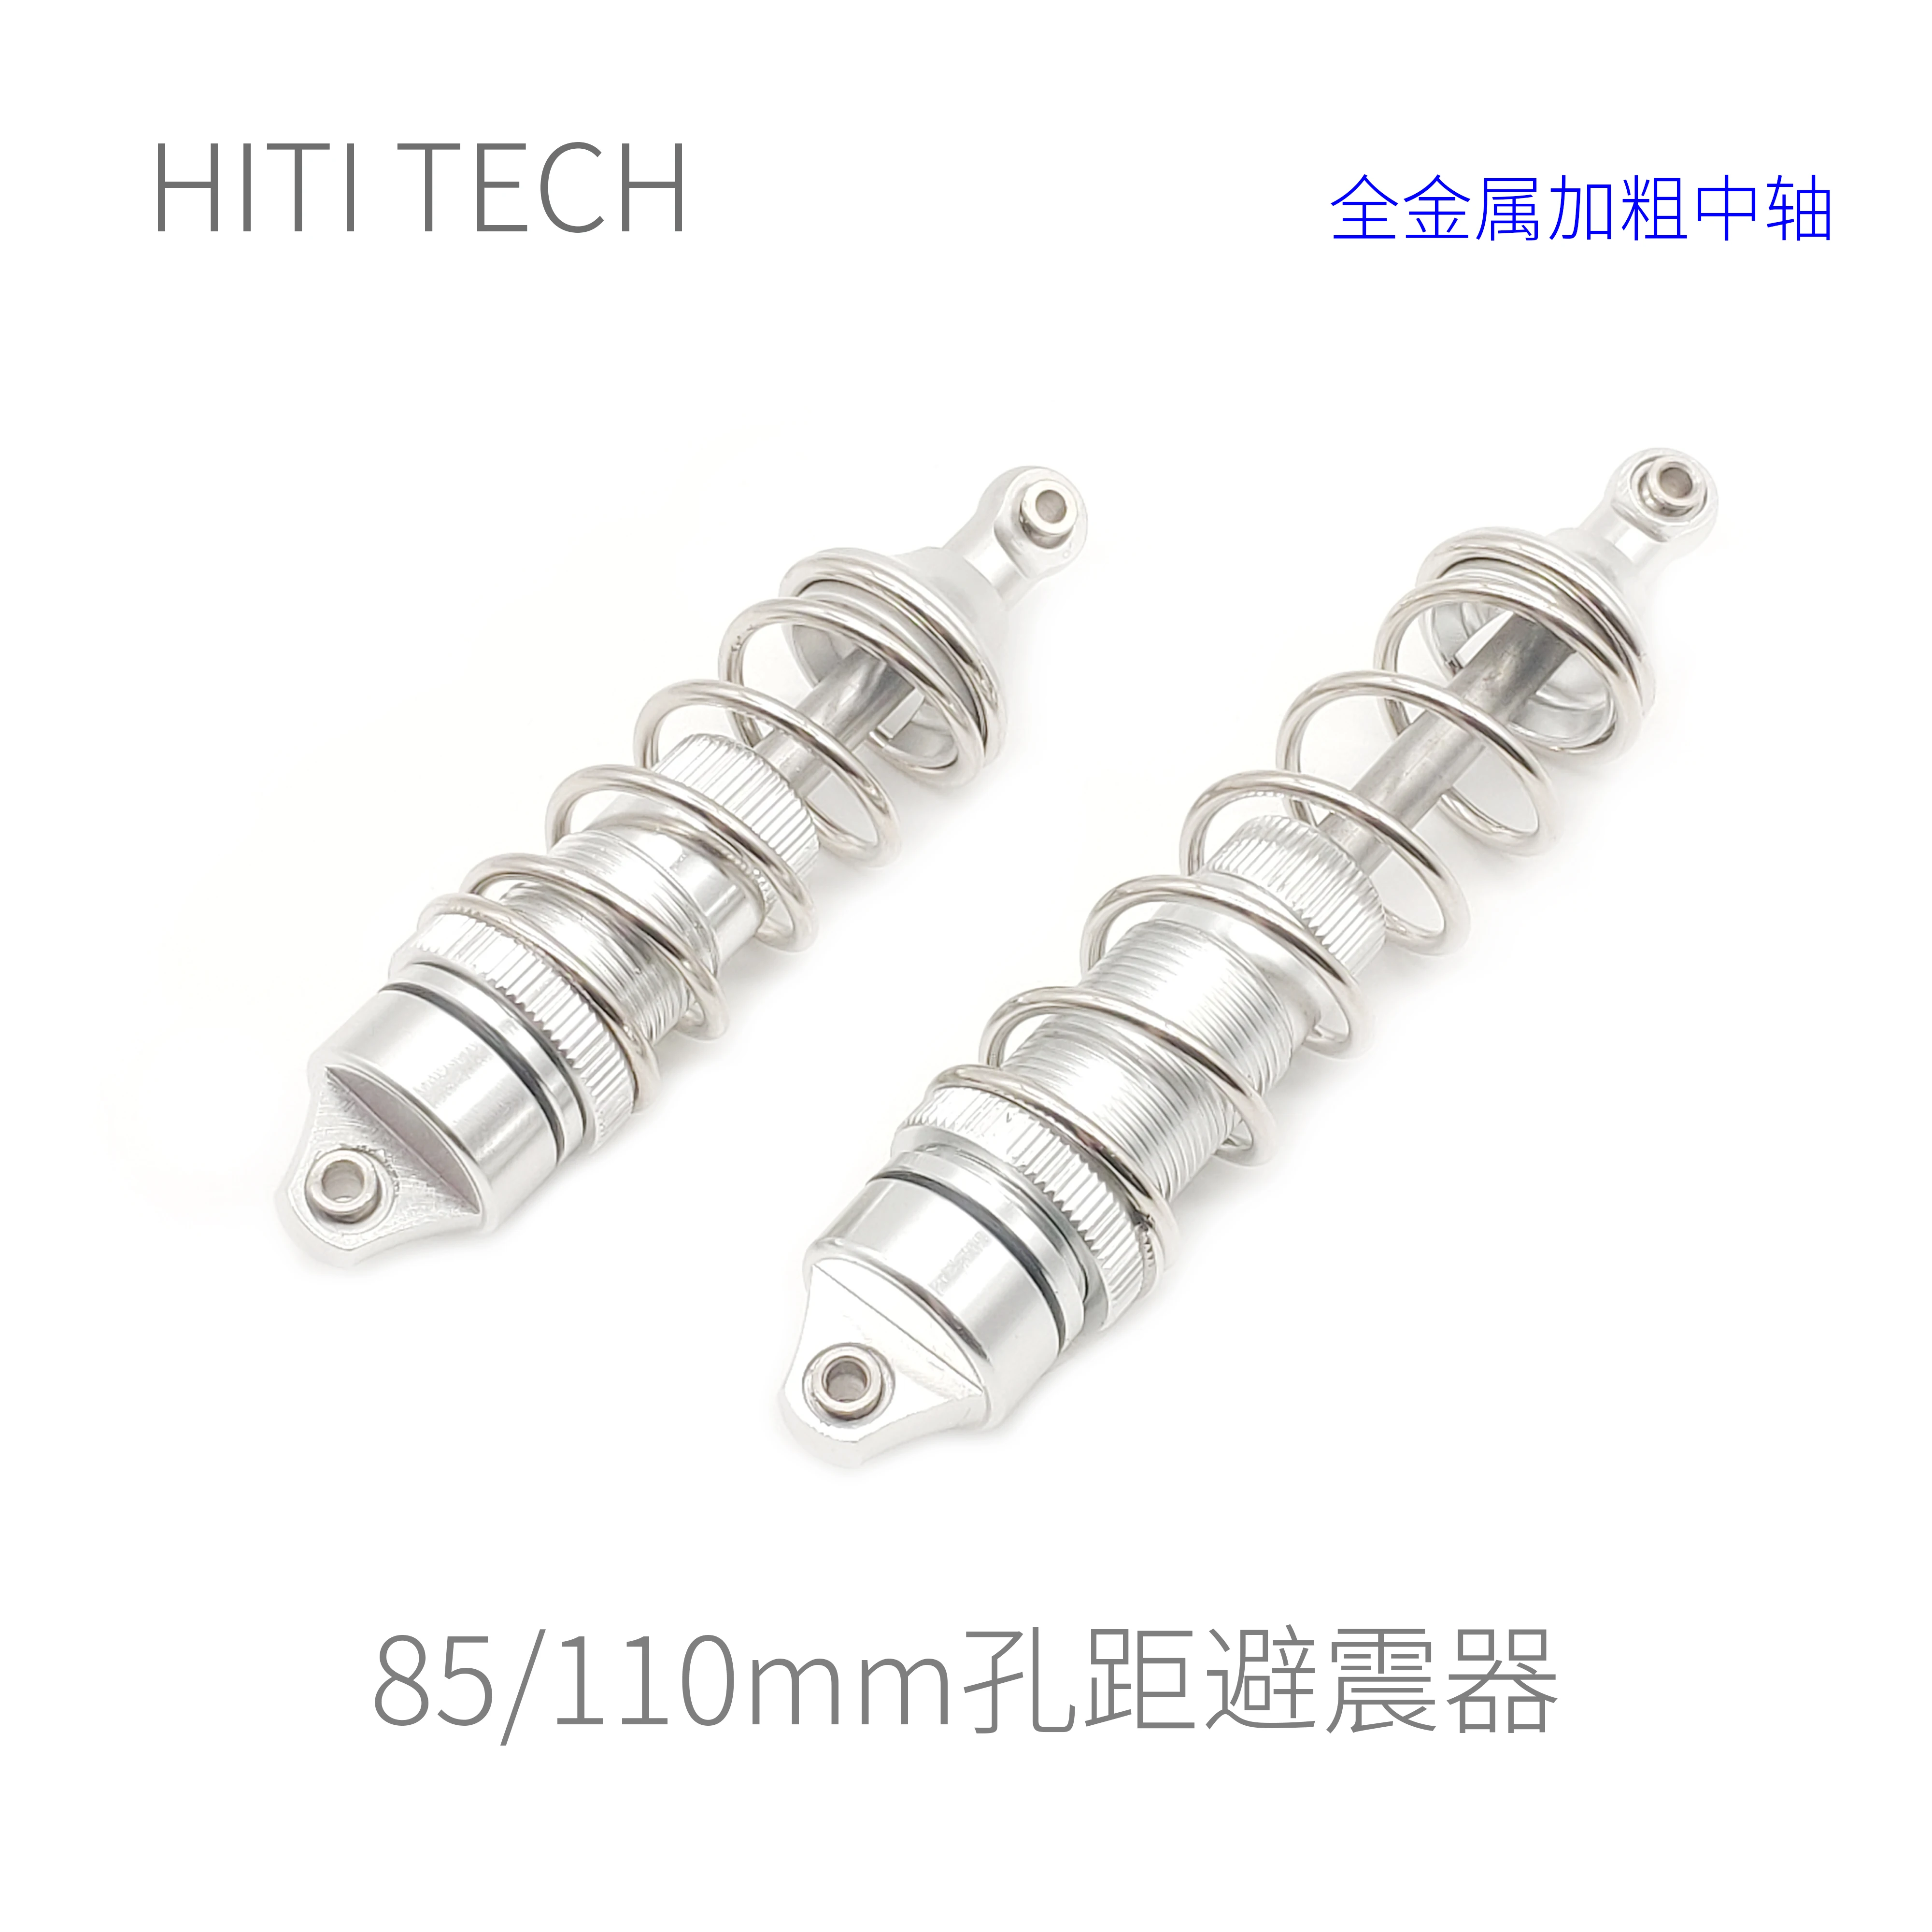 

[All metal 85/110mm] Robomaster robot shock absorber, bold center axle, silver 85mm, bold center axle, 10~35kg, one pair